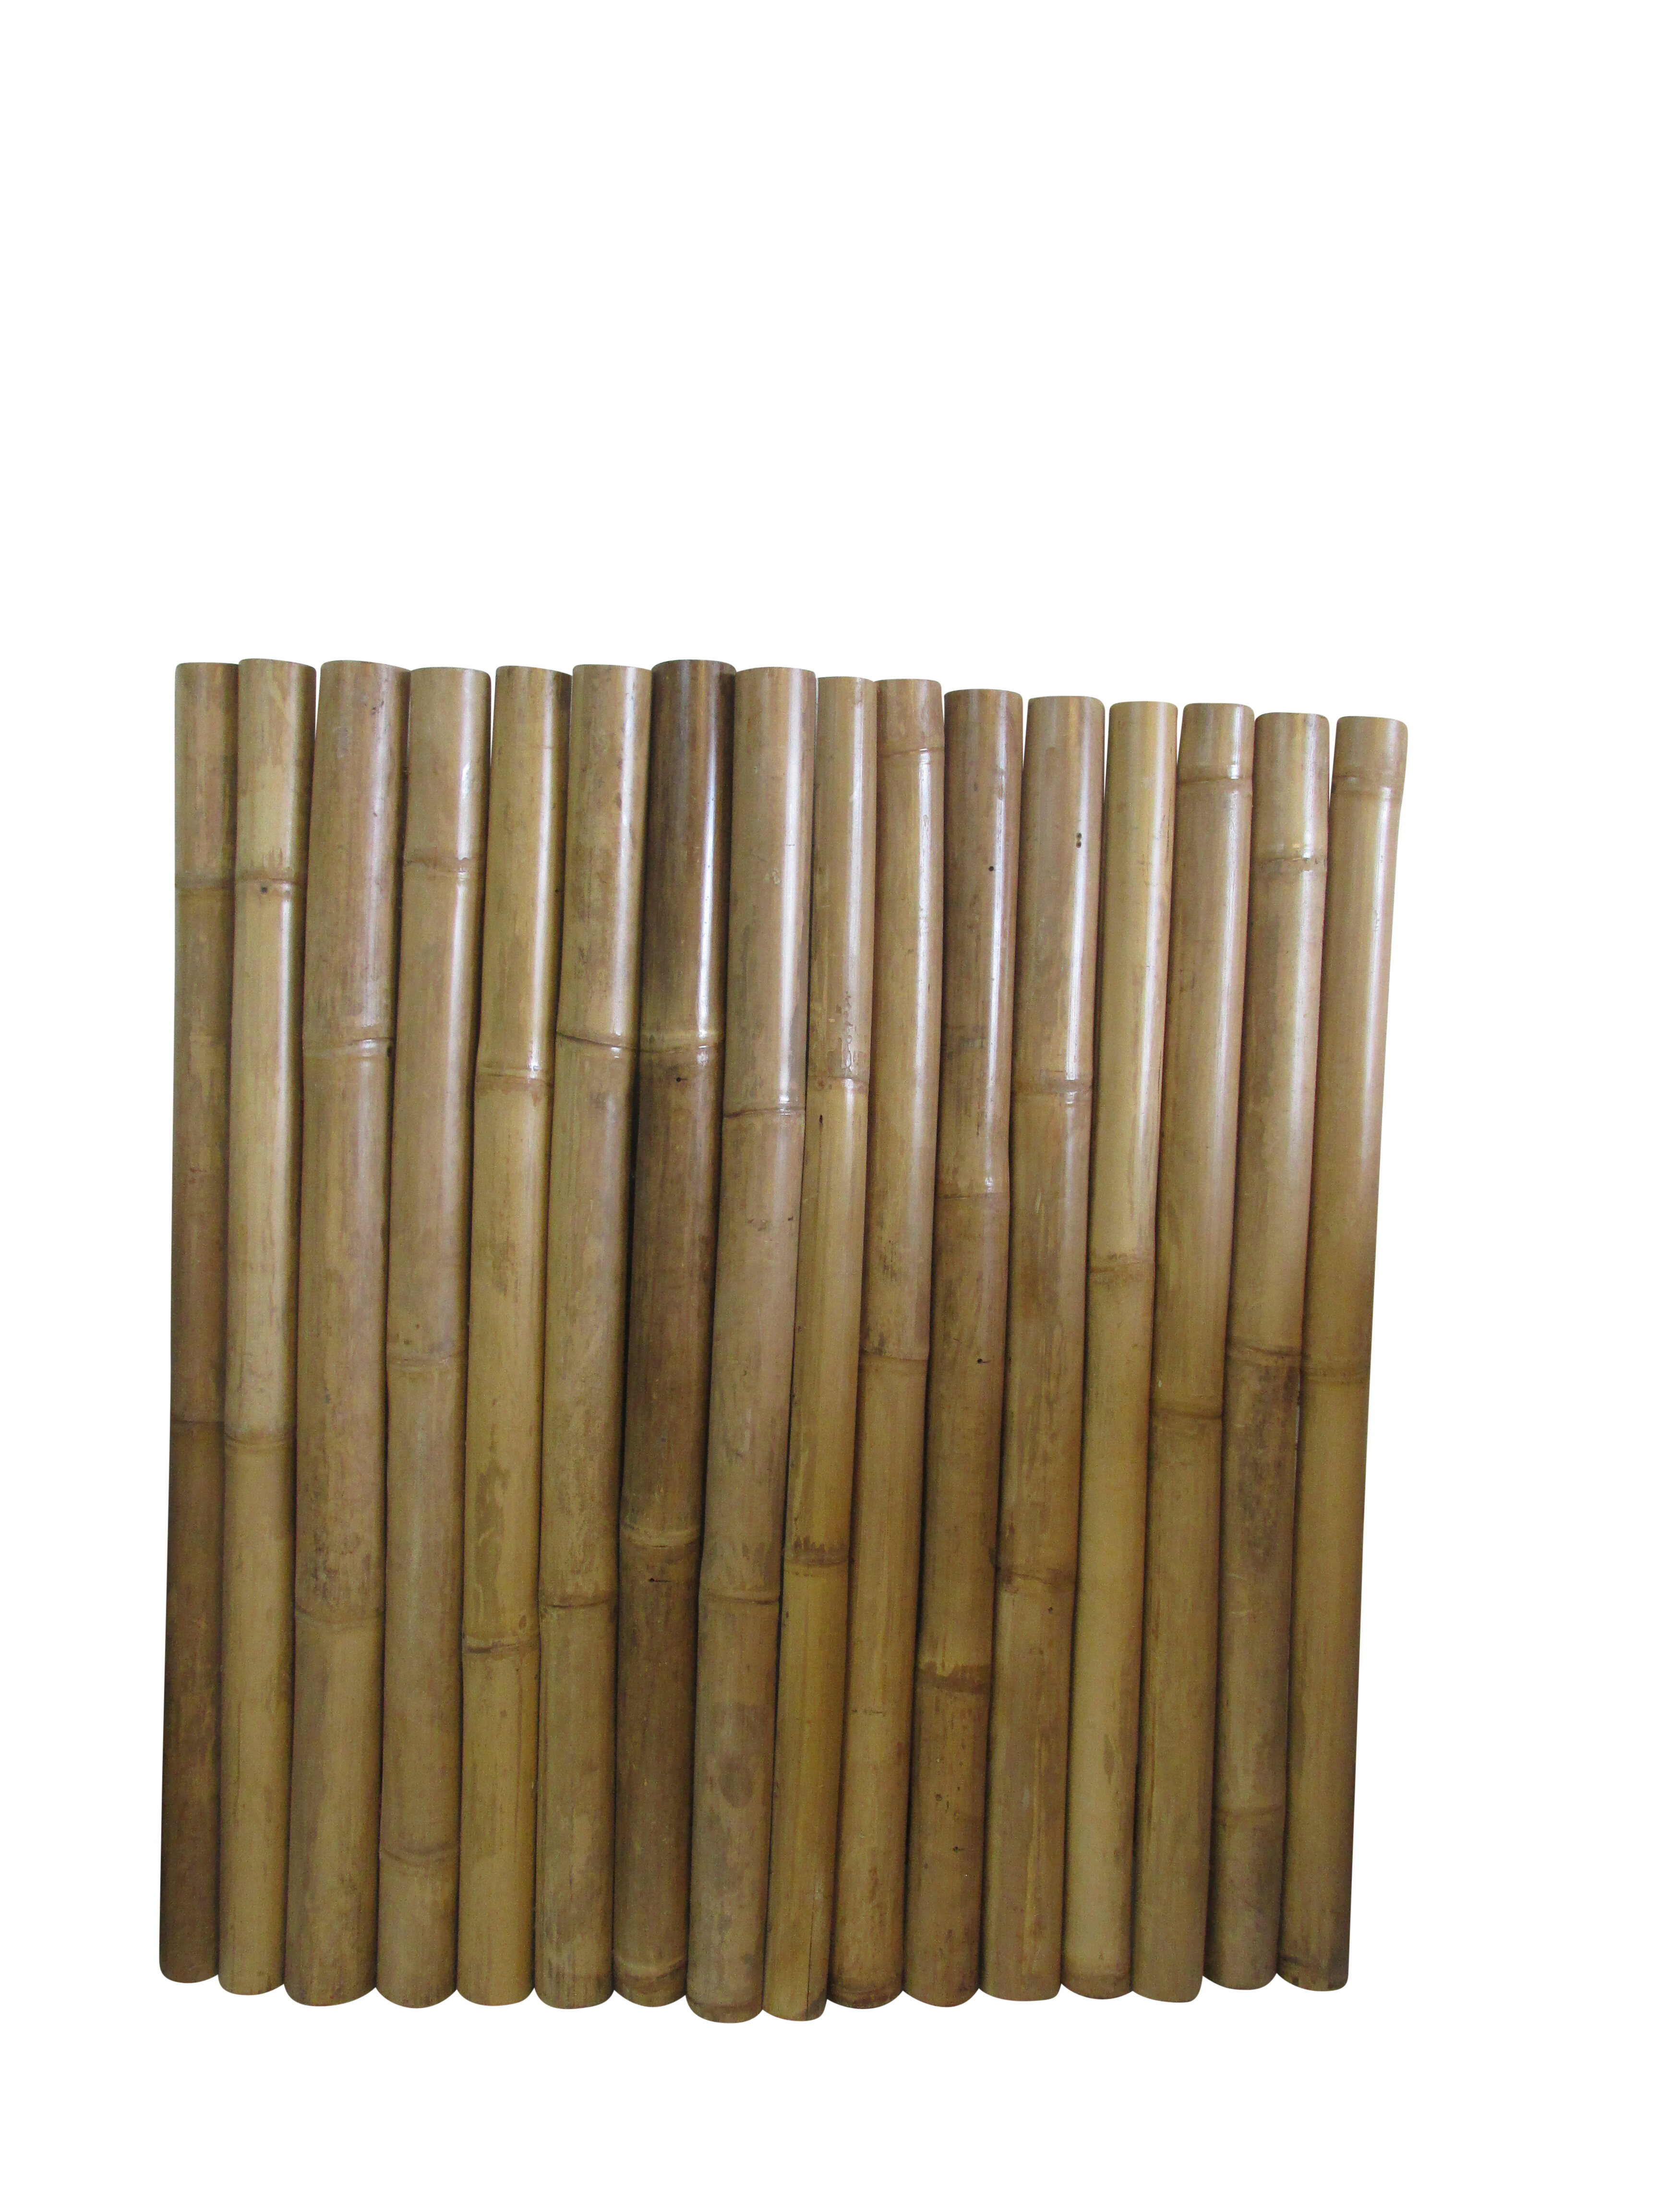 2 x 8ft Bamboo Poles - Bamboo Stick - Bamboo Halves - Large Bamboo Pole -  For Sale 